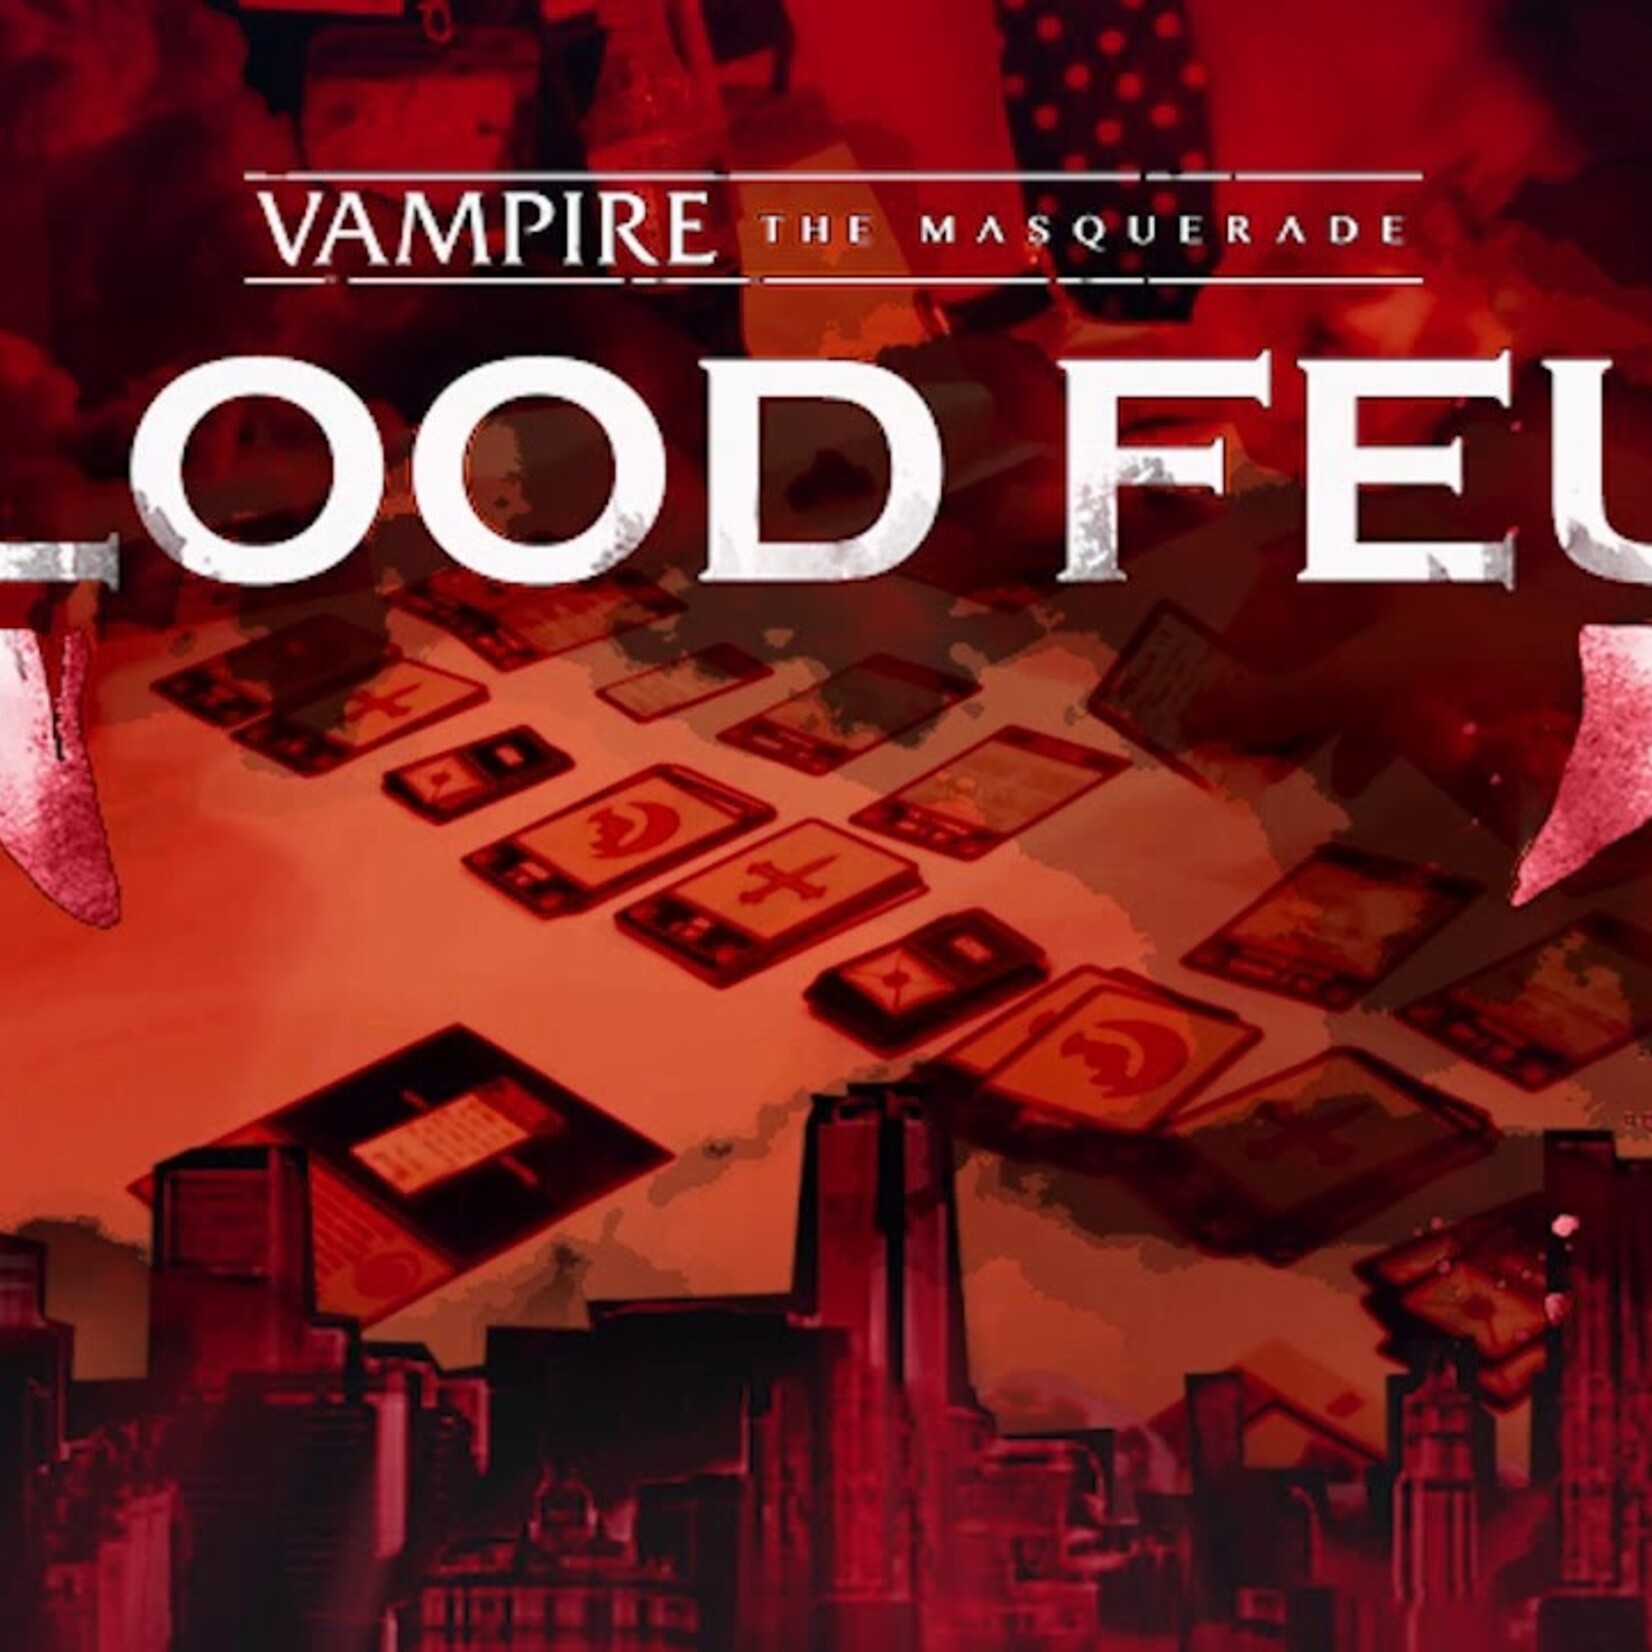 Vampire RIVALS BLOOD FEUD Big Event THE THINBLOODED